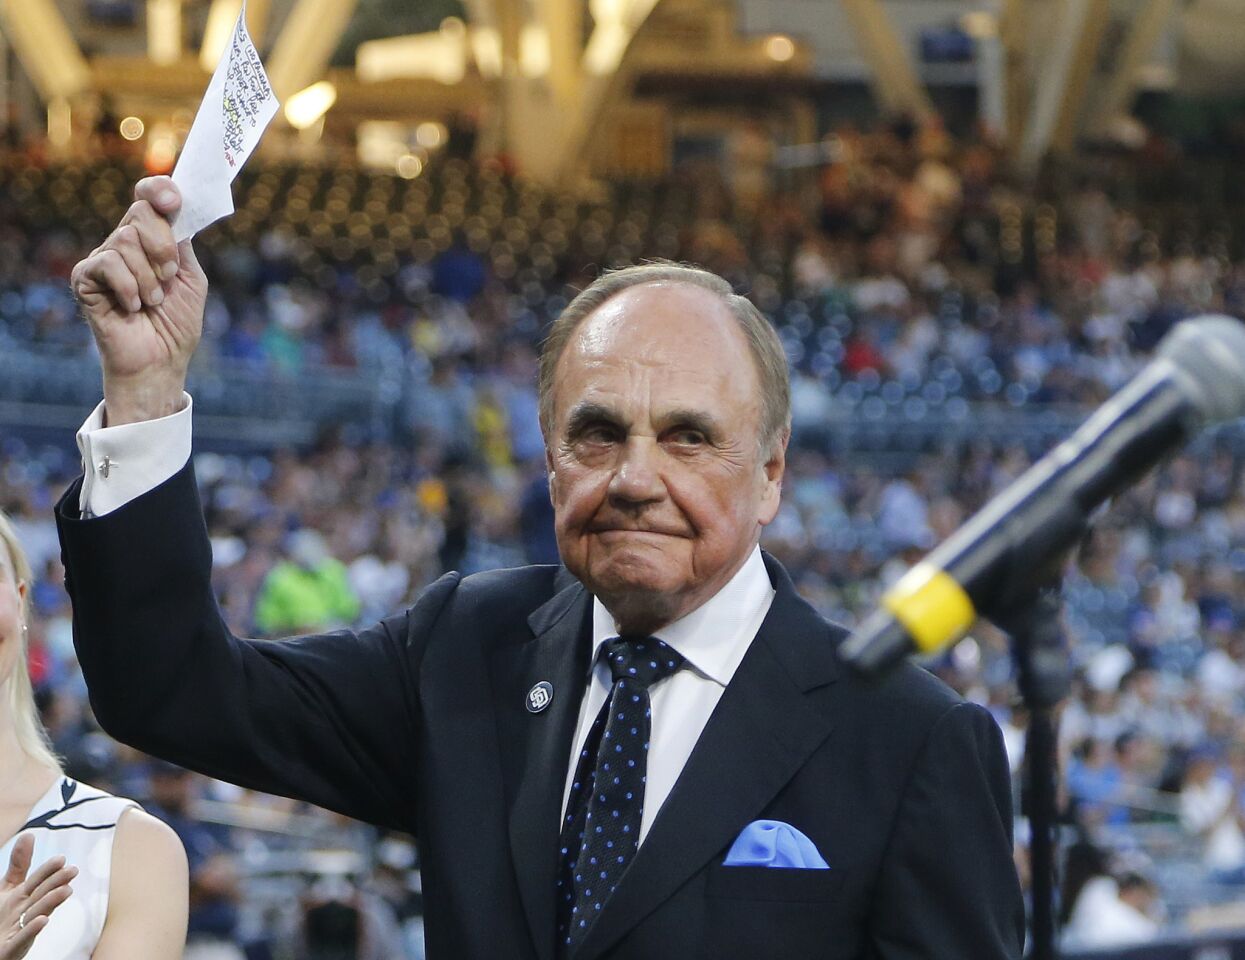 The veteran sports broadcaster was long recognized as one of the most versatile and perhaps most enthusiastic announcers of his era. He also was an author, a longtime fixture at Pasadena’s Rose Parade, the host of several sports-themed TV game shows and was still calling San Diego Padres baseball games in his later years. He was 82. Full obituary